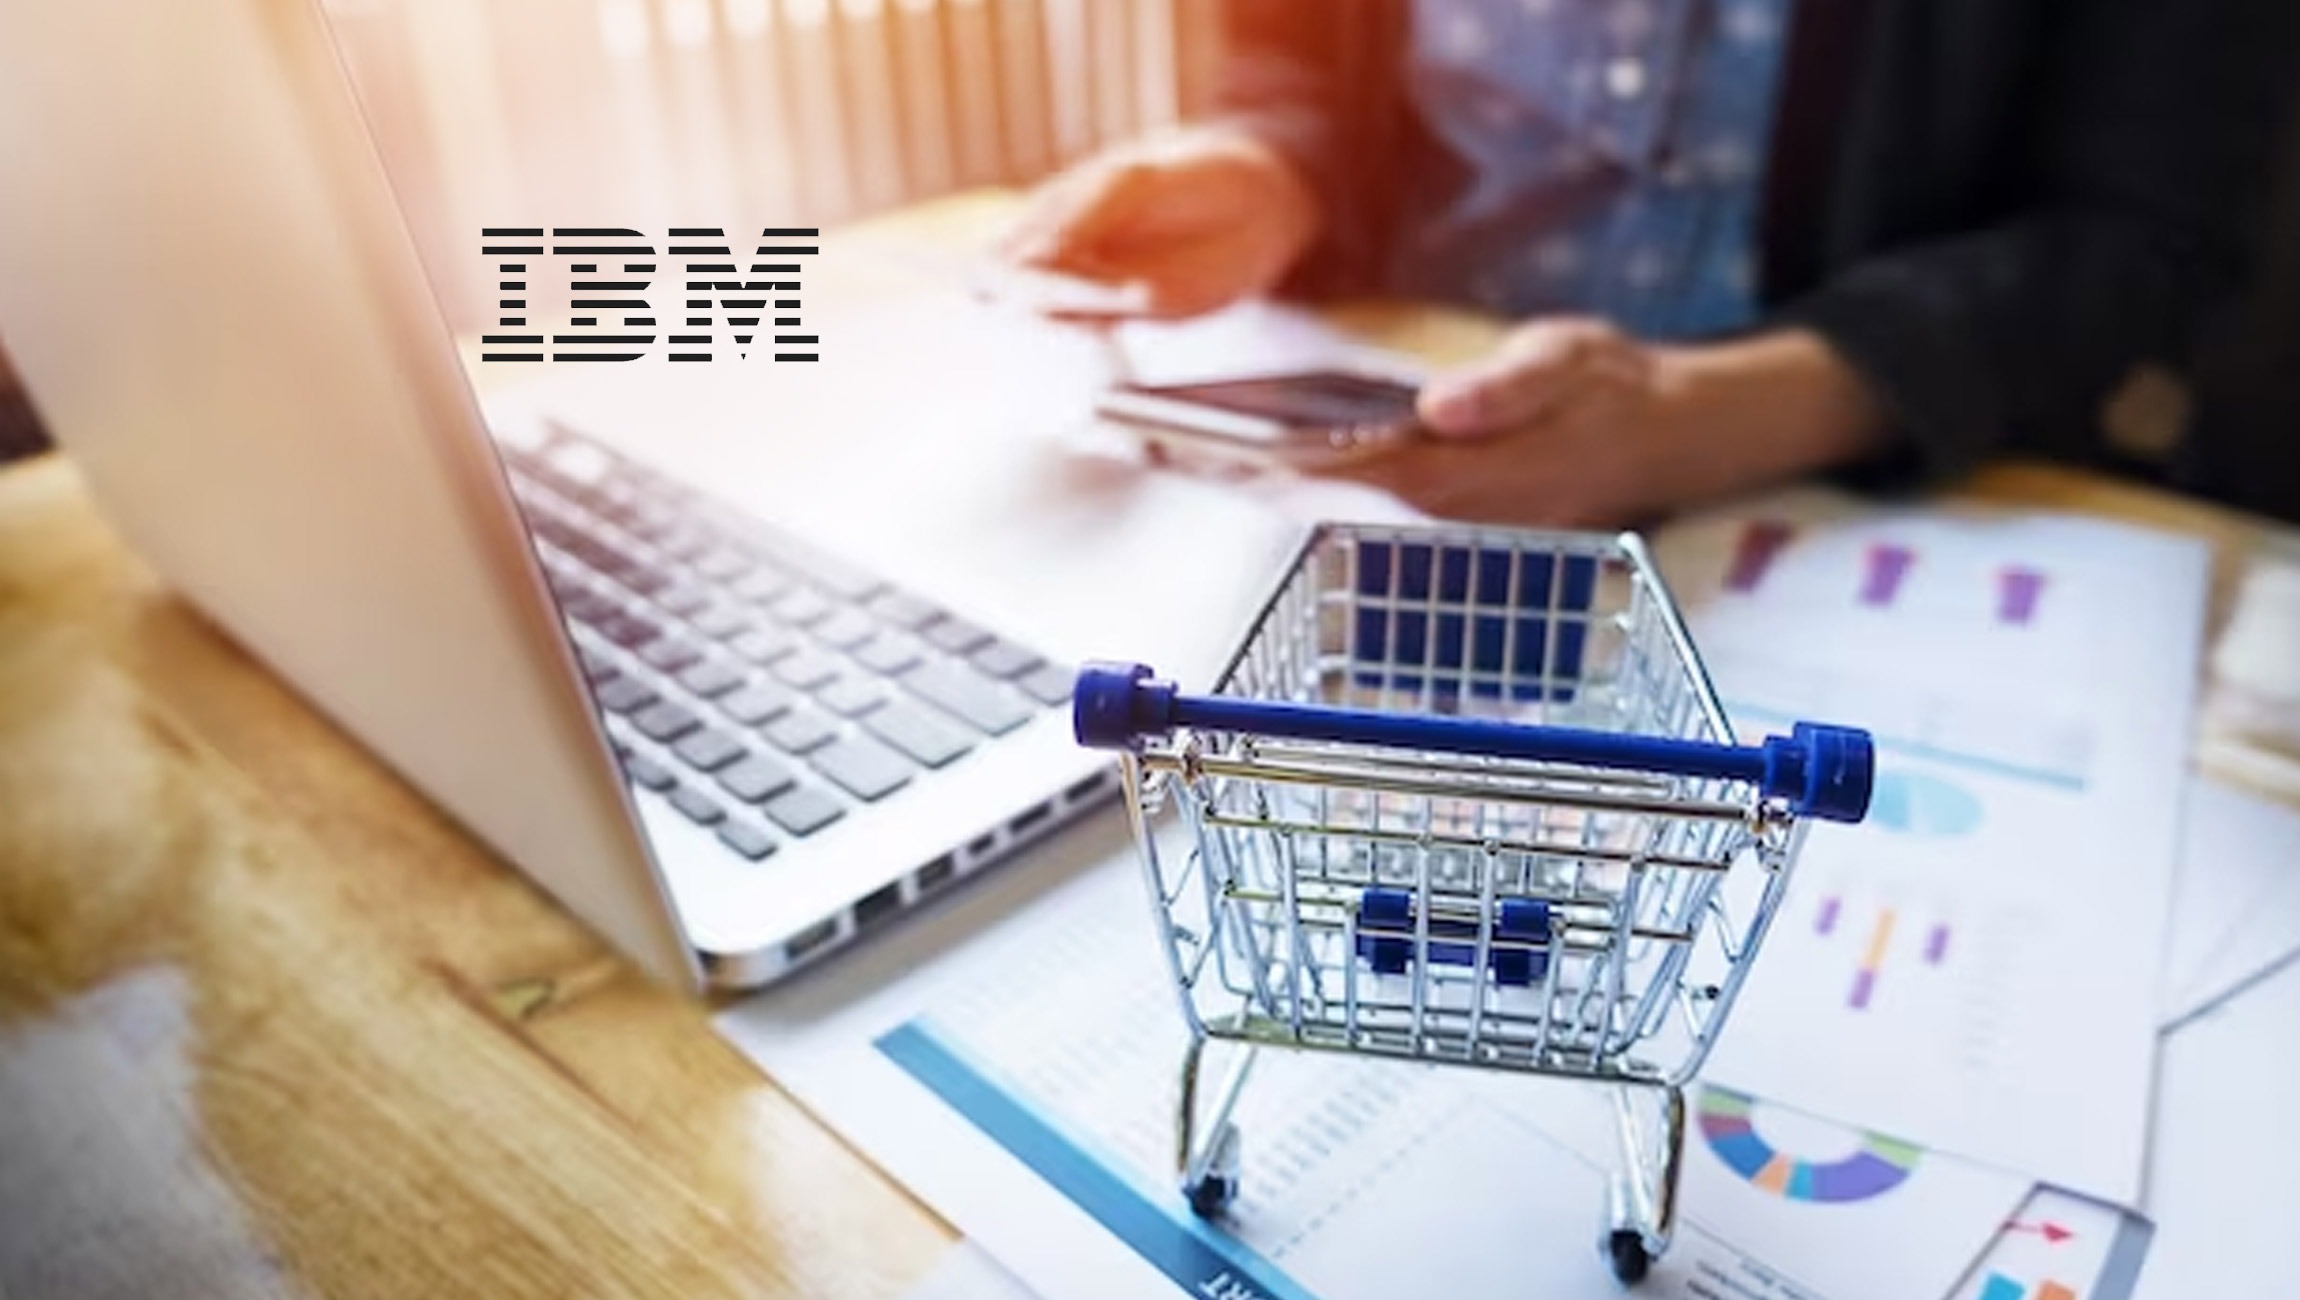 IBM-Study-Widespread-Discontent-in-Retail-Experiences_-Consumers-Signal-Interest-in-AI-Driven-Shopping-Amid-Economic-Strain